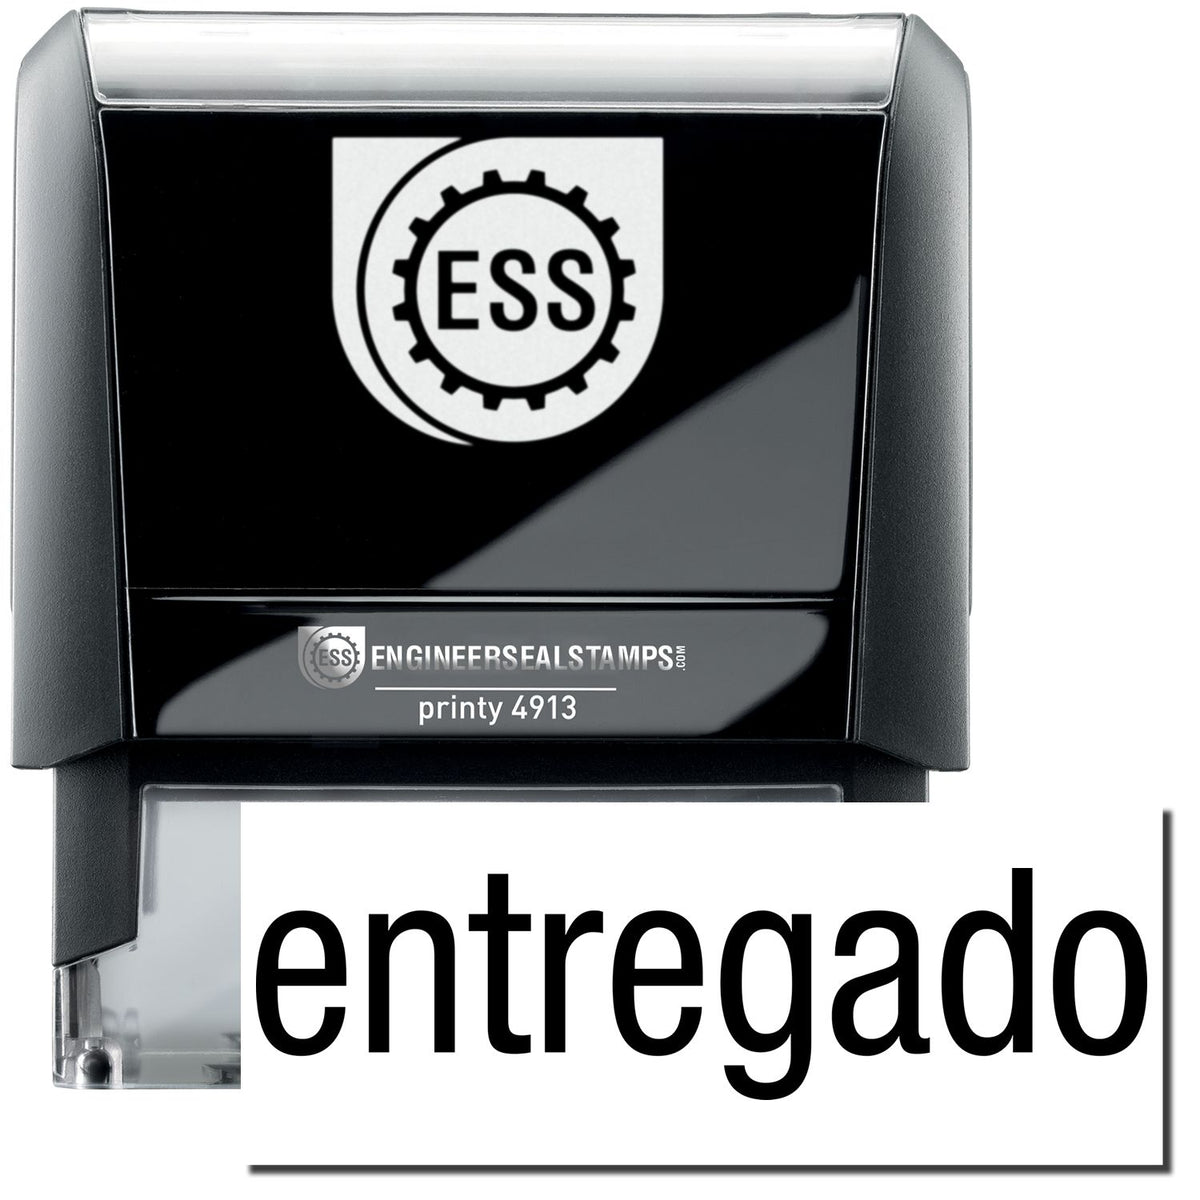 A self-inking stamp with a stamped image showing how the text &quot;entregado&quot; in a large font is displayed by it after stamping.